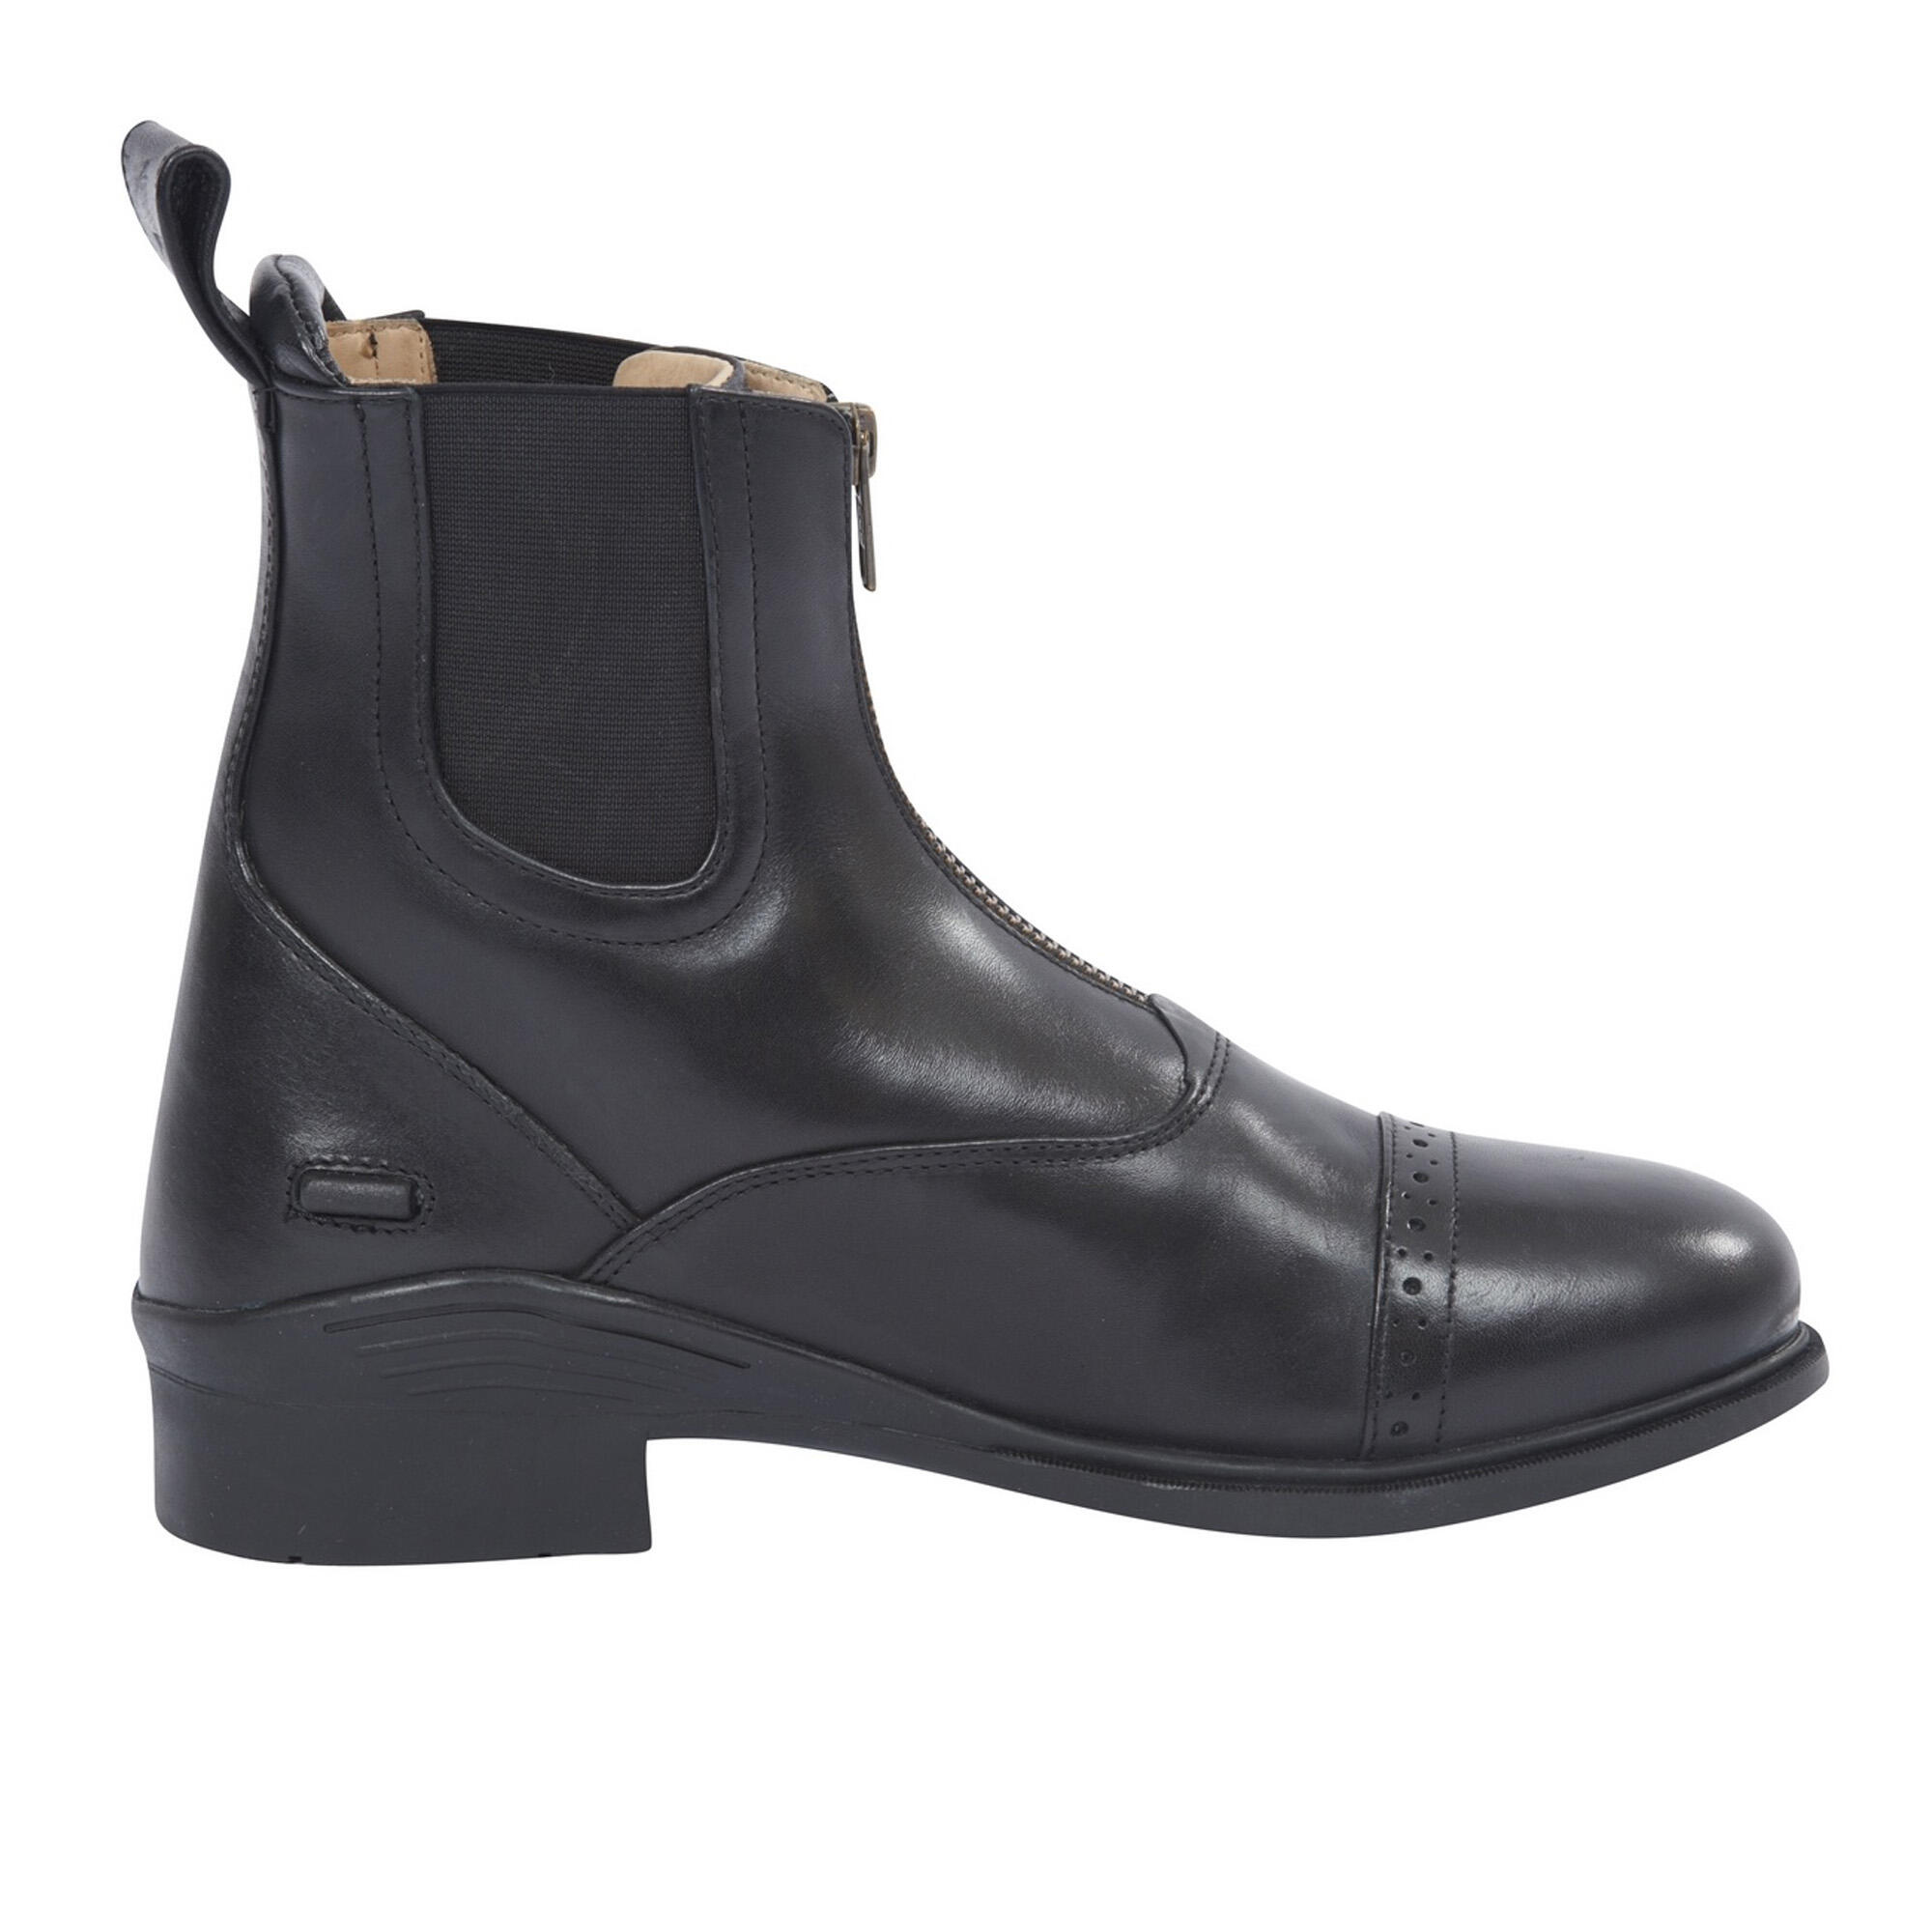 Evolution Adults Zip Front Leather Paddock Boots (Black) 4/5